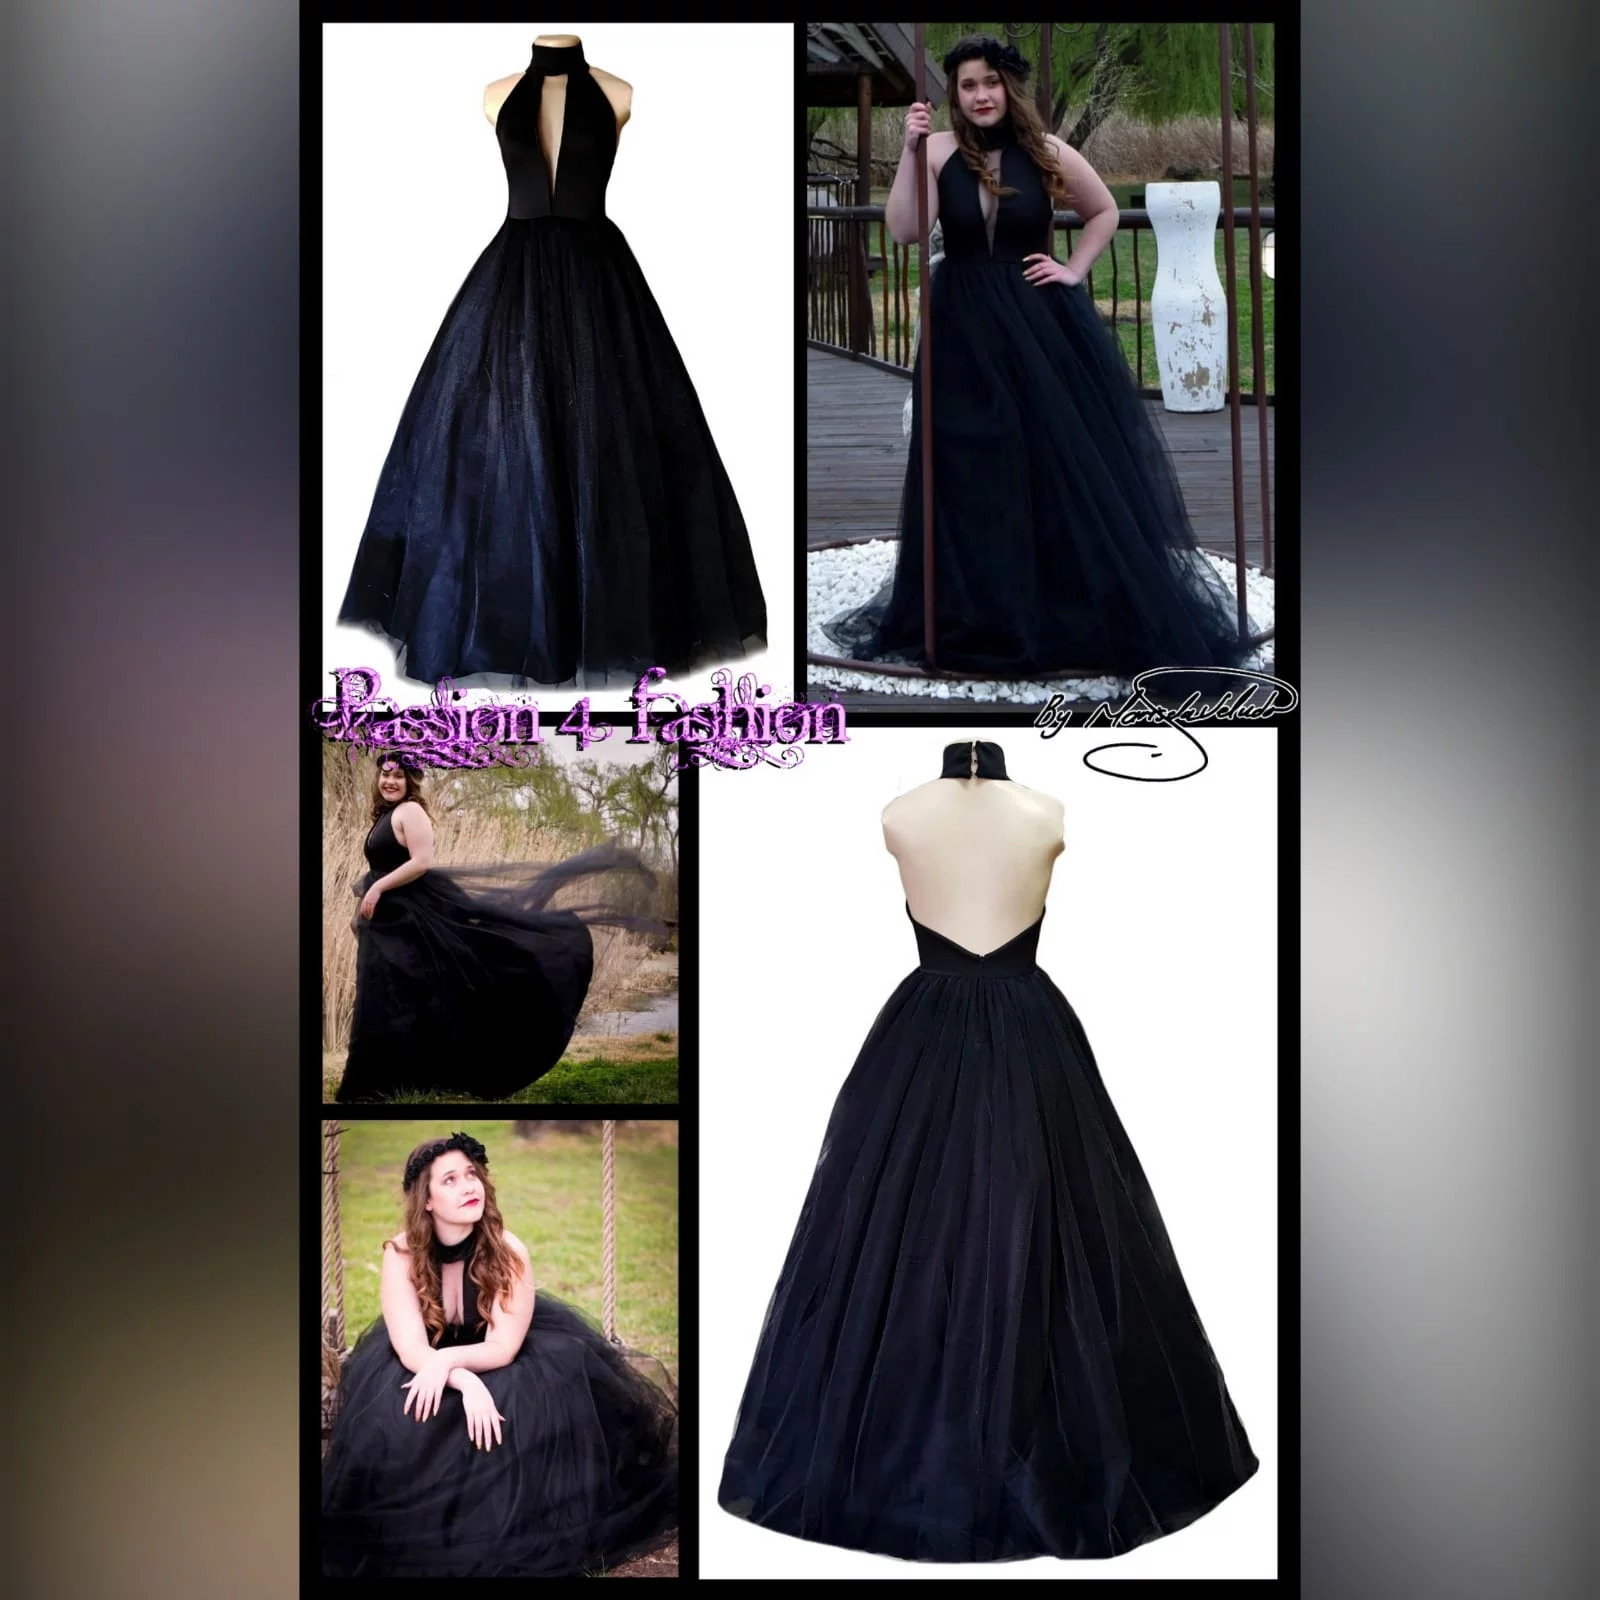 Black tulle prom ball gown 6 black tulle prom ball gown with an illusion plunging neckline and choker, backless design creating a v, with a full long tulle bottom.